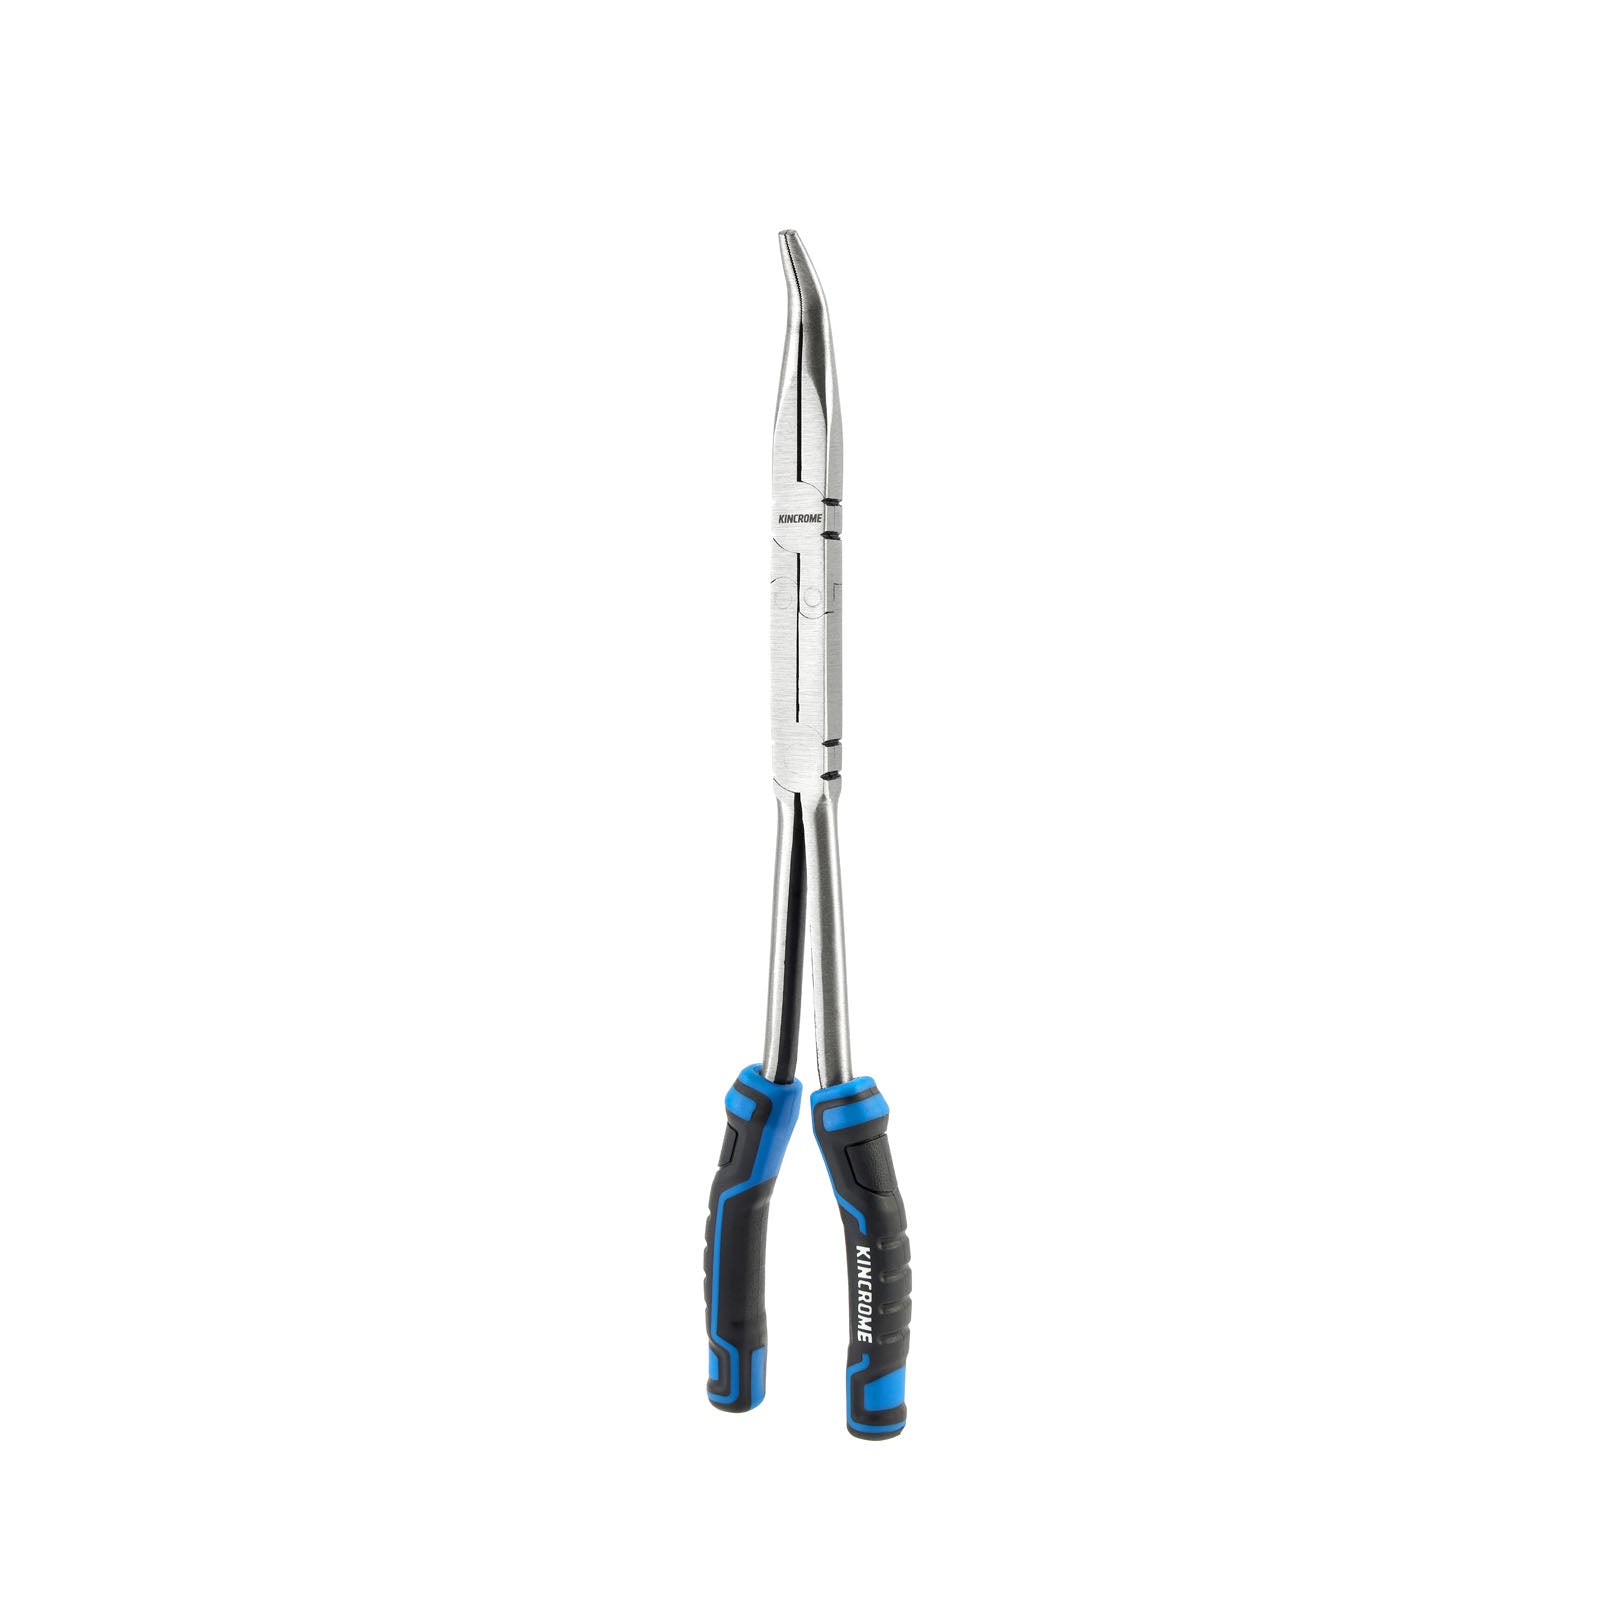 325mm Extra-long Reach Plier, Bent 45° - K4256 by Kincrome